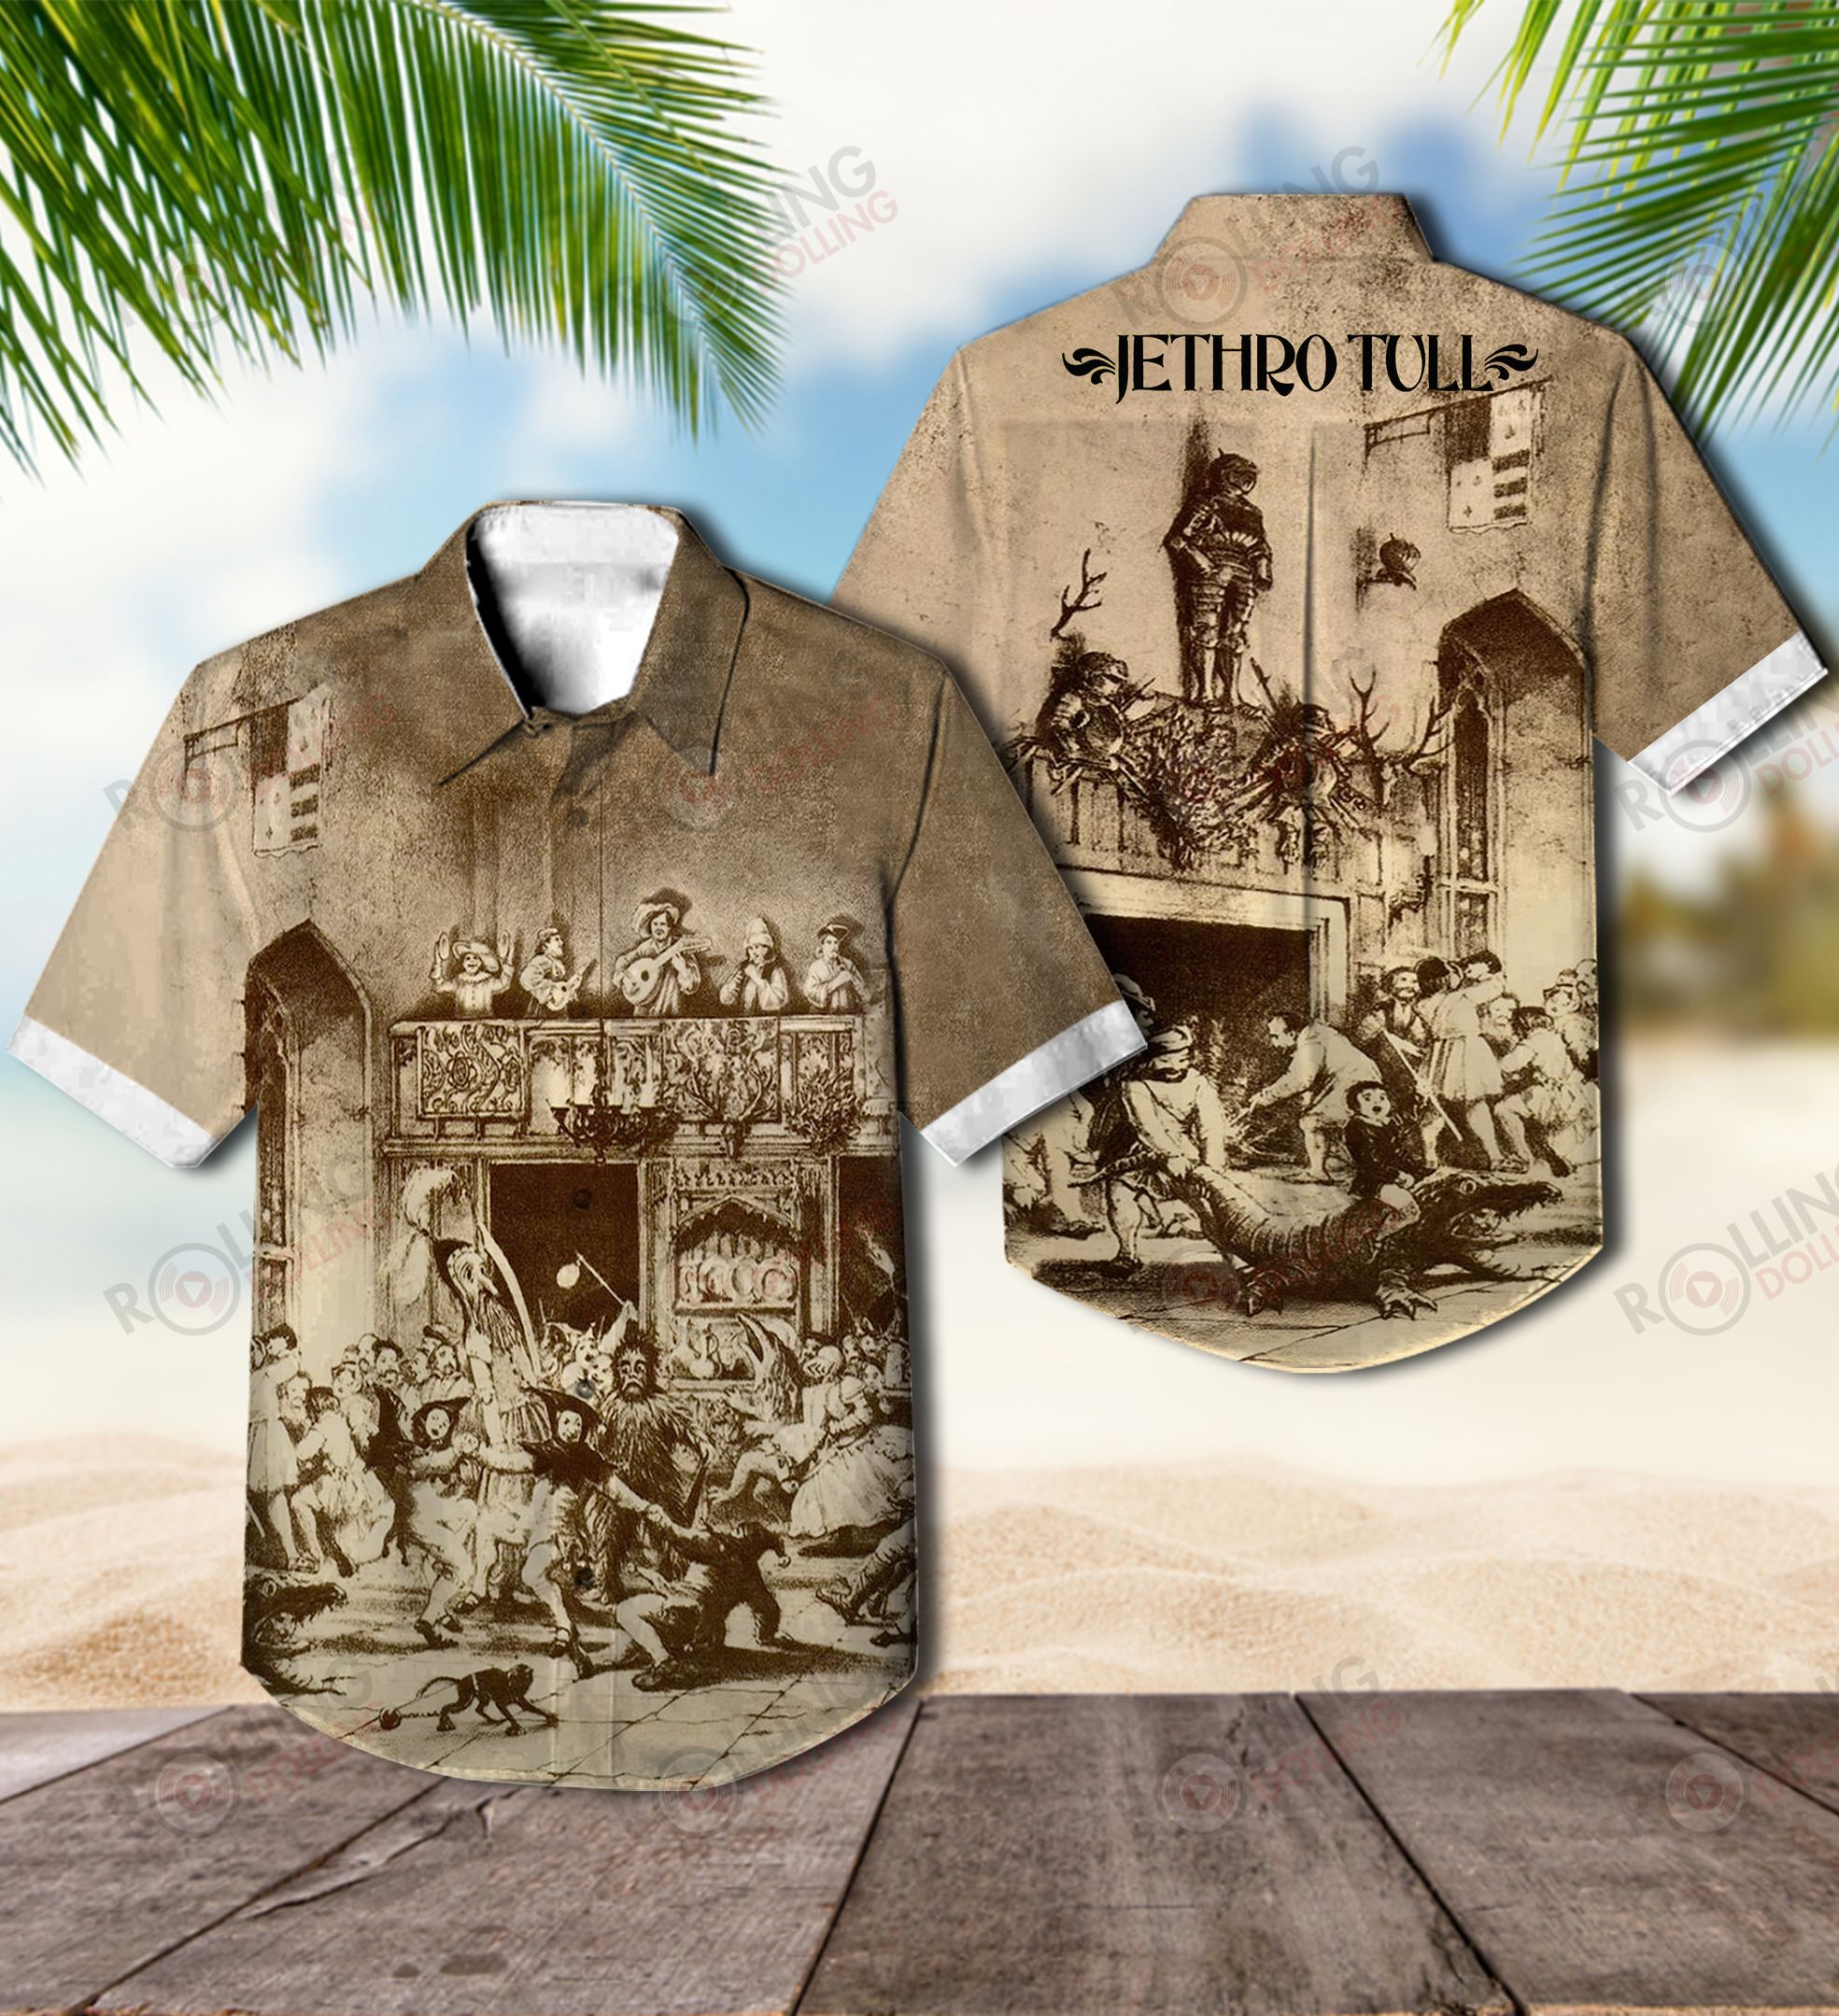 This would make a great gift for any fan who loves Hawaiian Shirt as well as Rock band 67